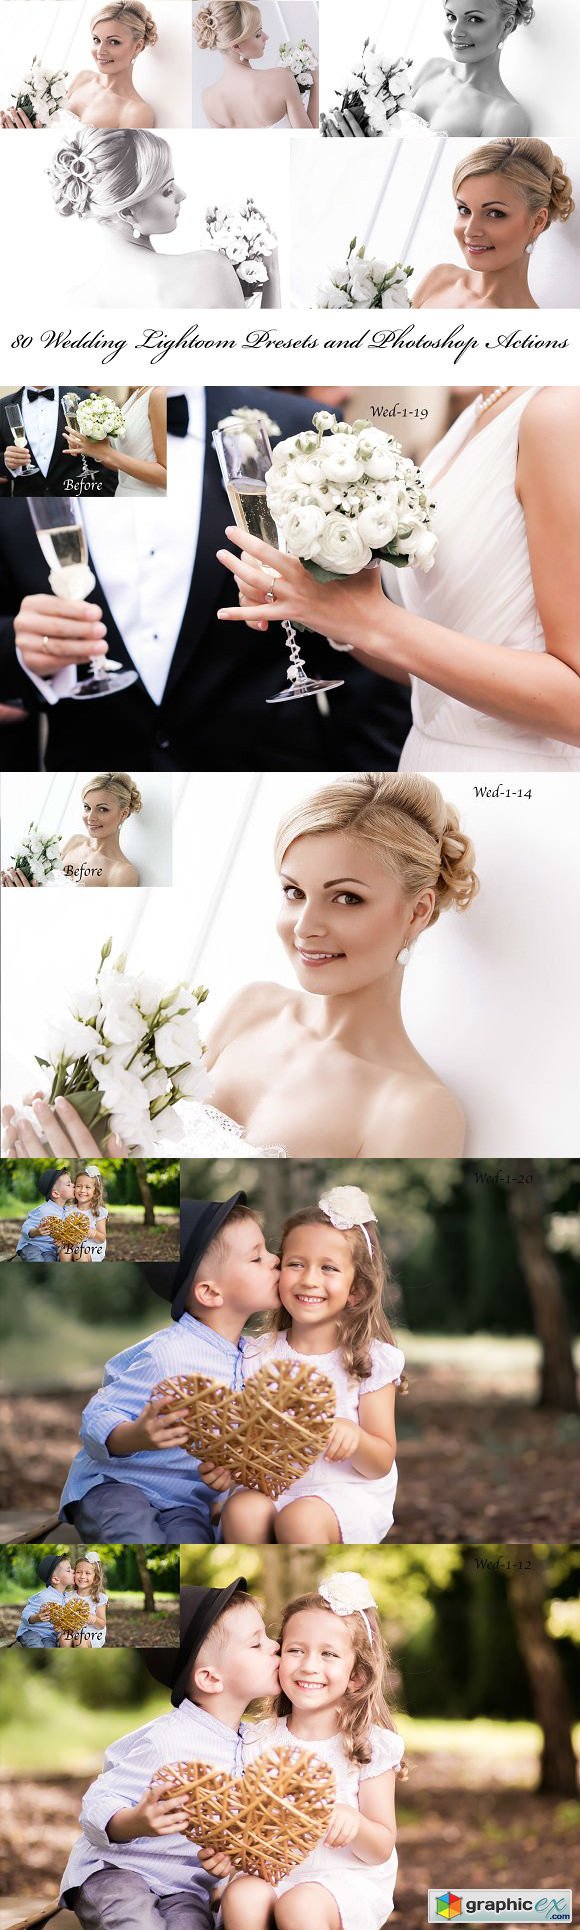 80 Wedding Presets and Actions